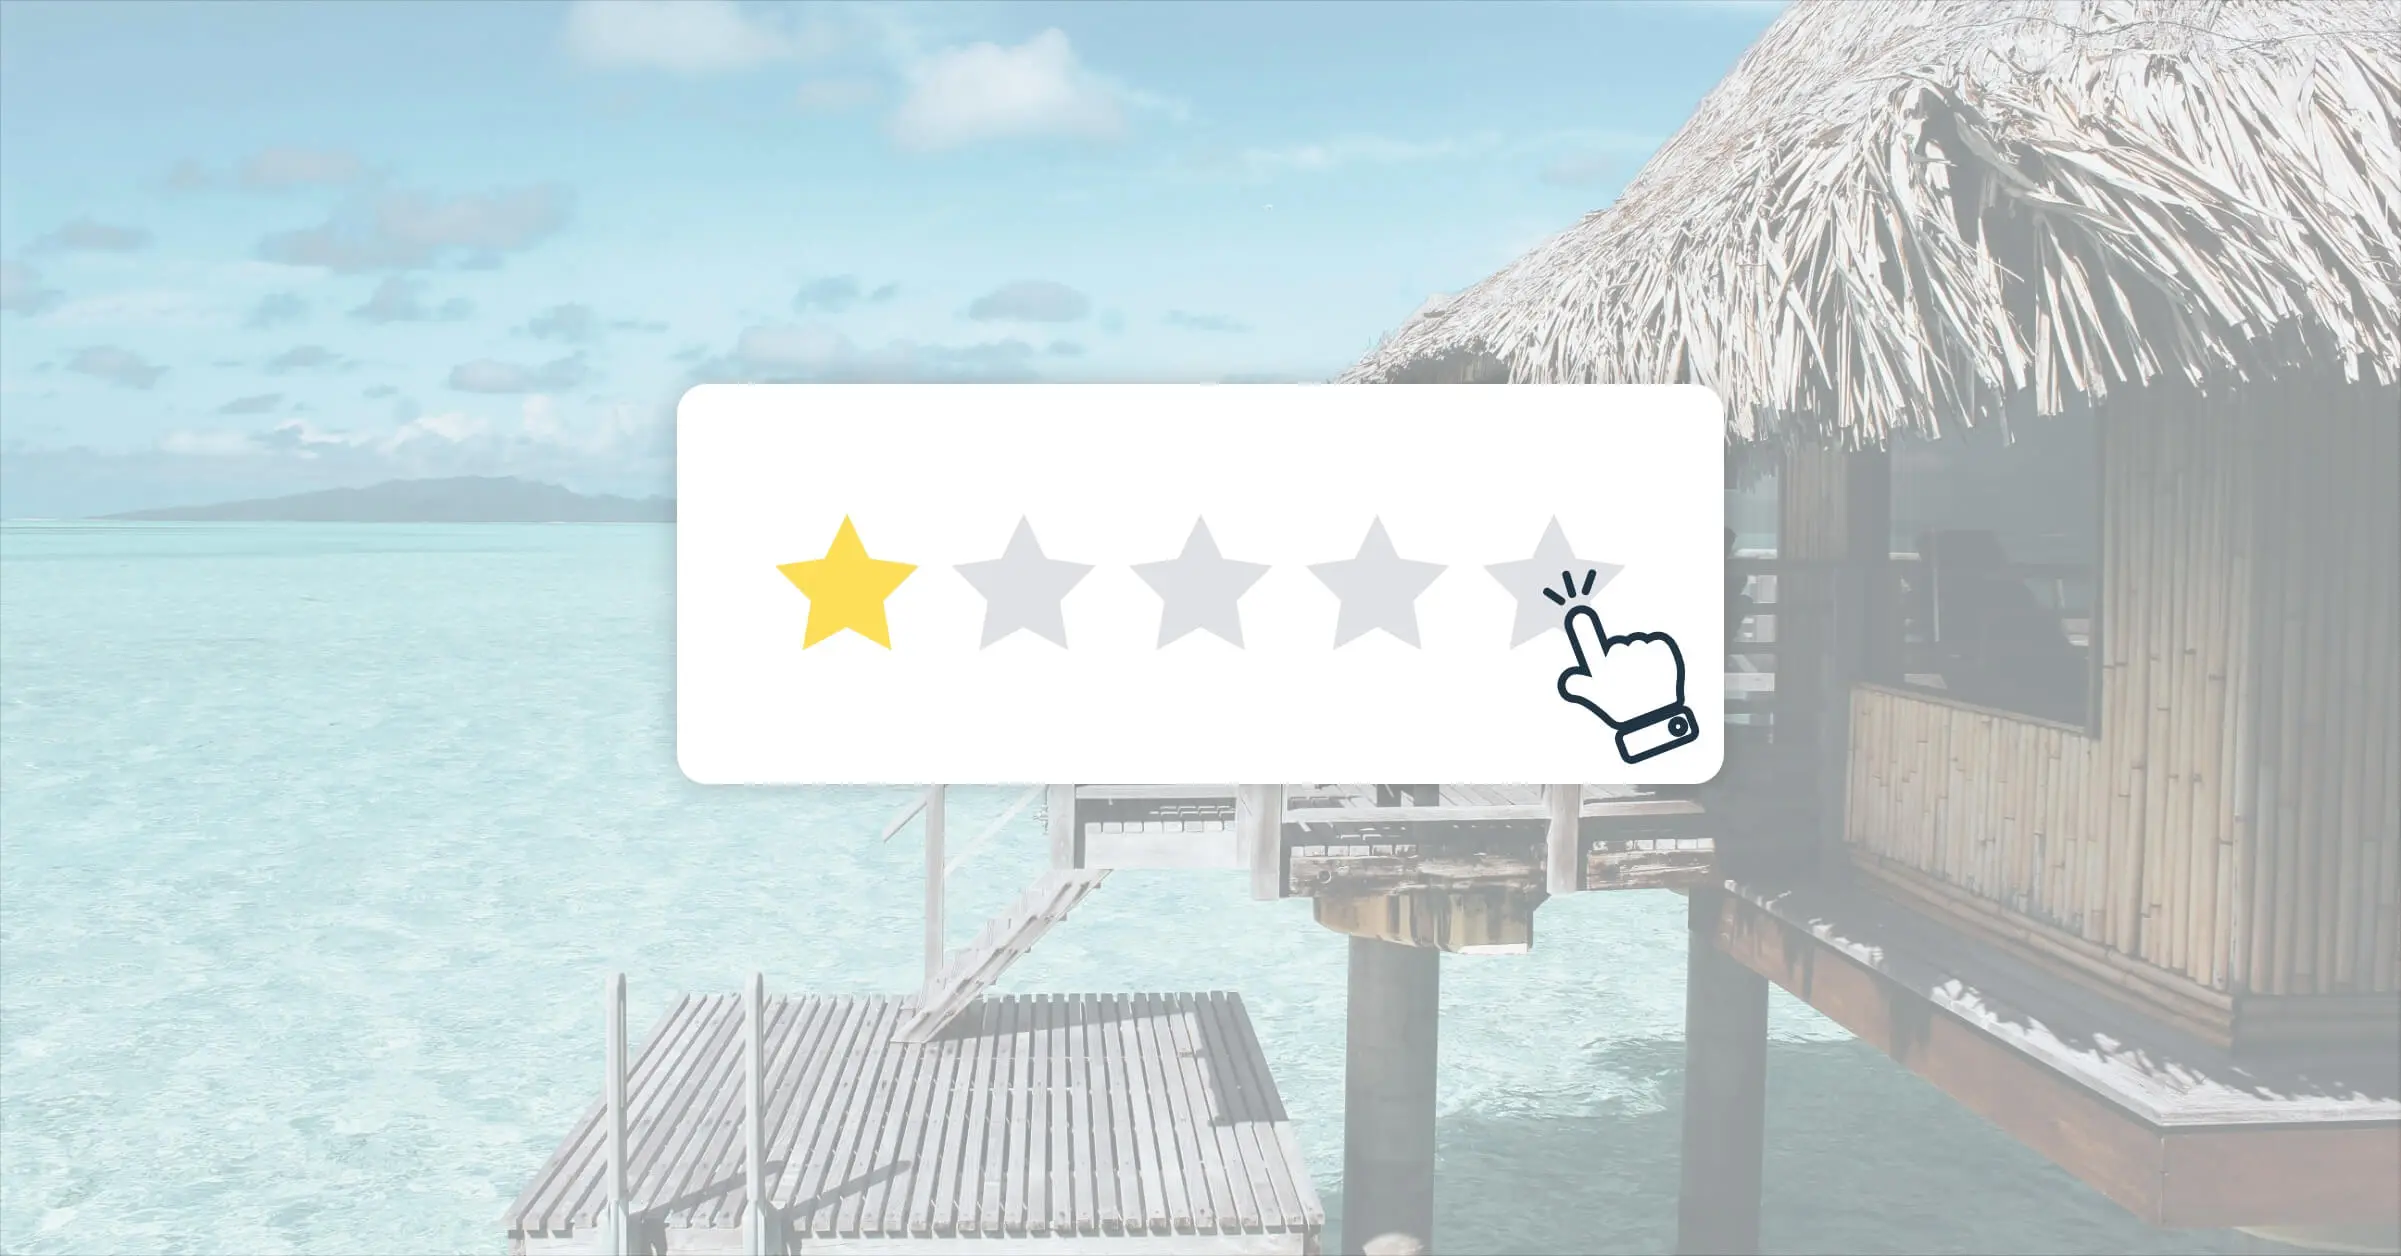 Here's how to improve hotel guest satisfaction and get 5-star reviews 1